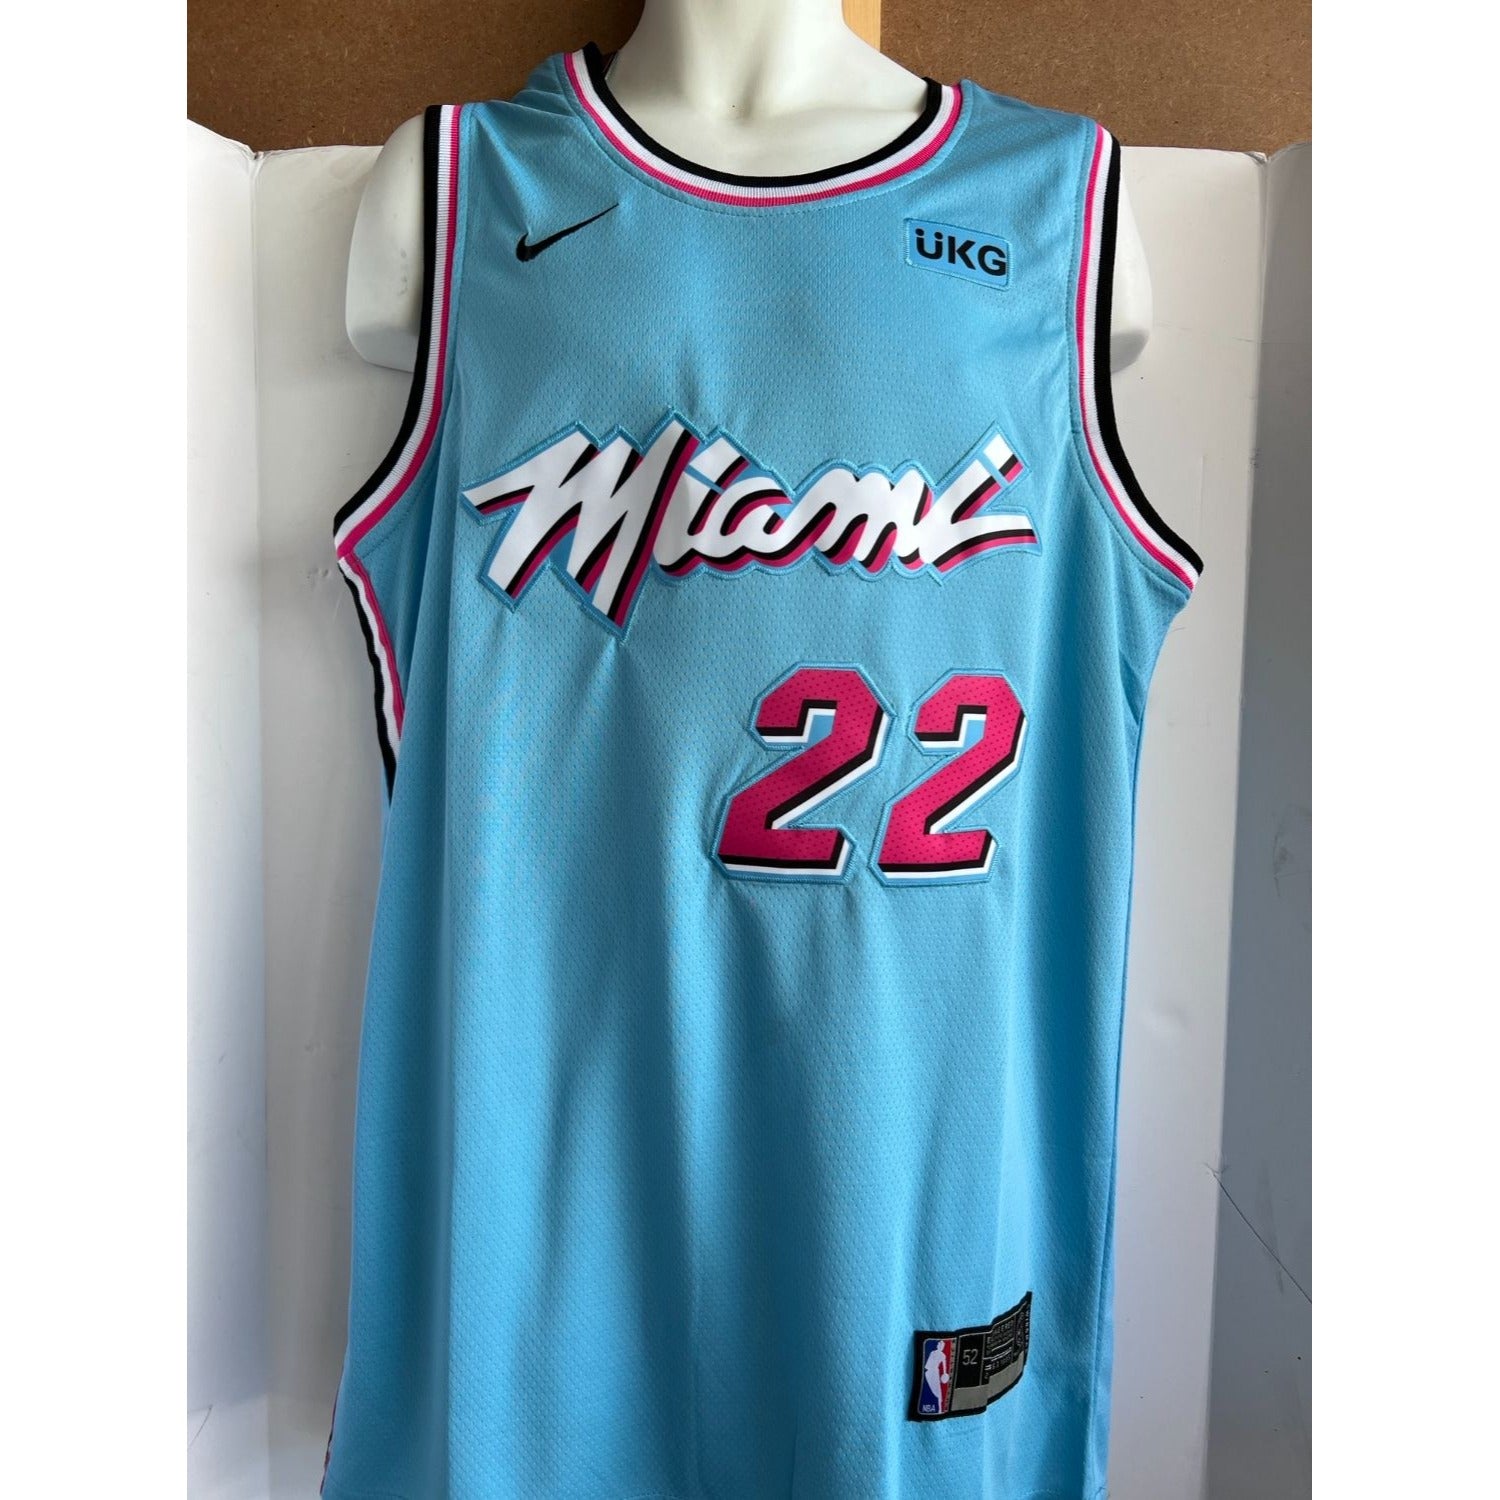 Jimmy Butler Miami Heat official jersey signed with proof